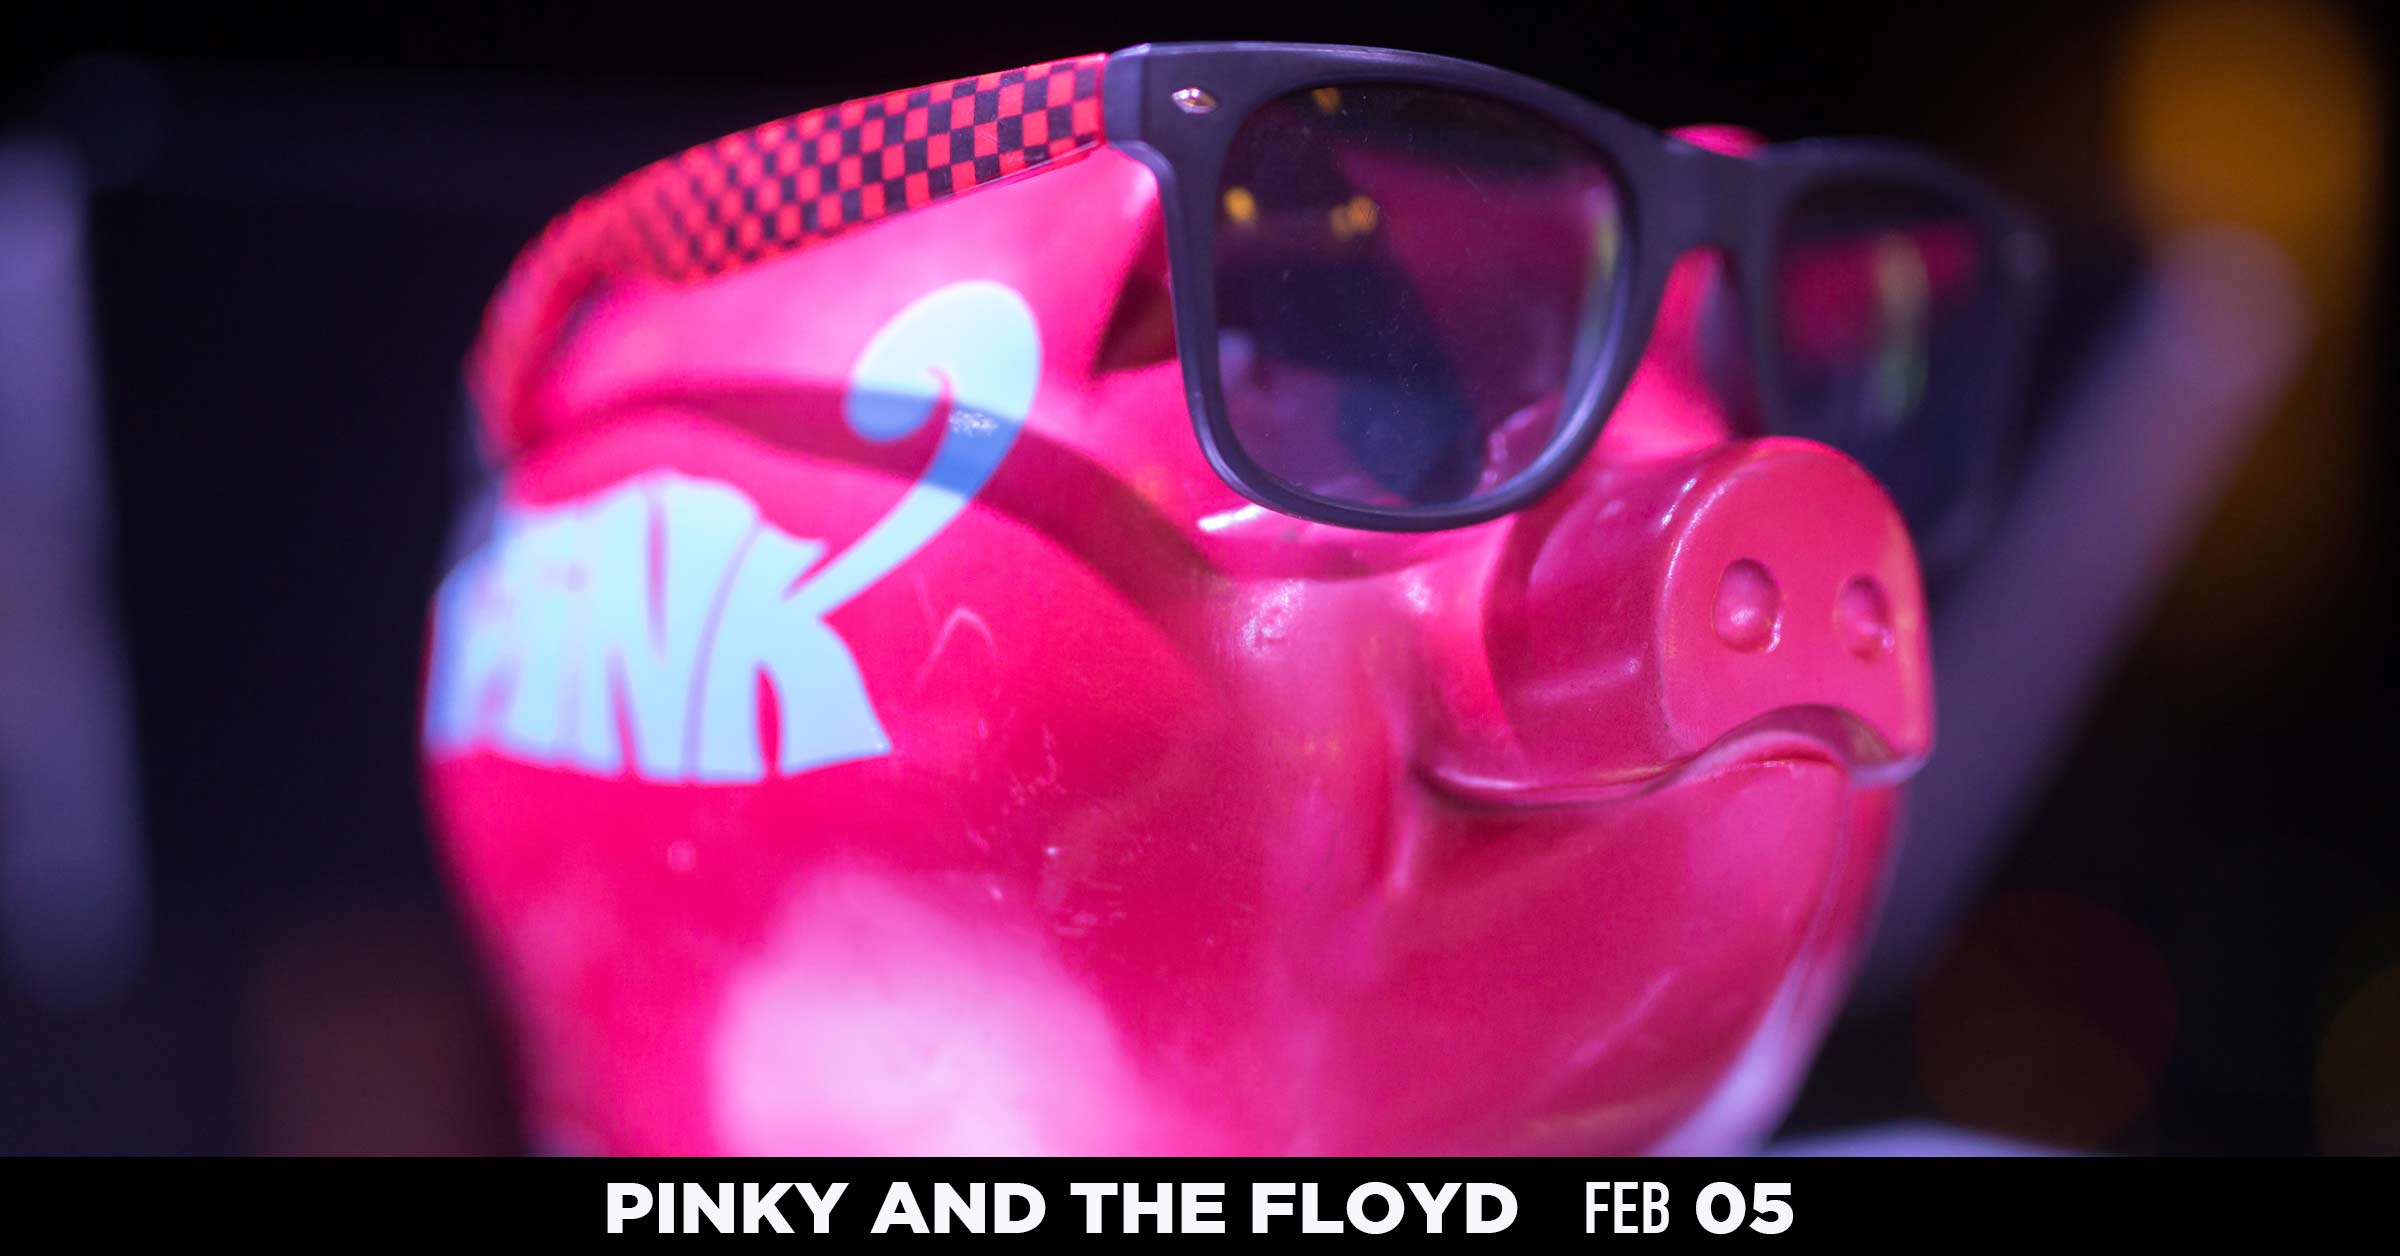 Pinky and The Floyd - Feb 05